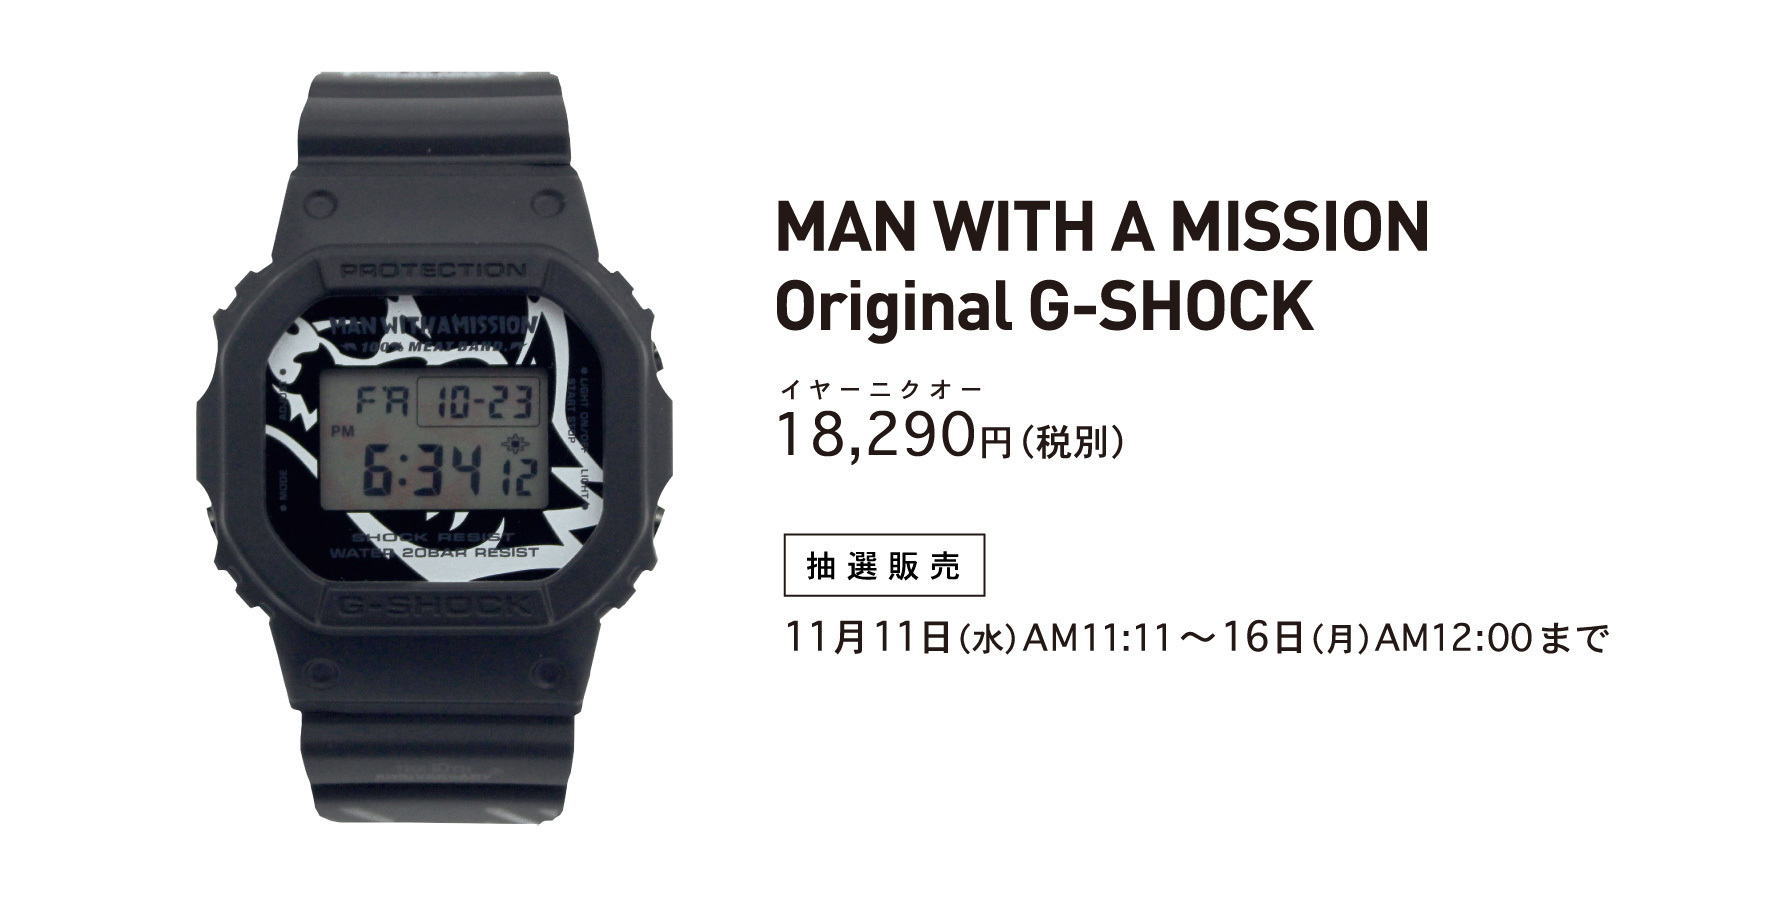 MAN WITH A MISSION Original G-SHOCK | FUN WITH A MISSION